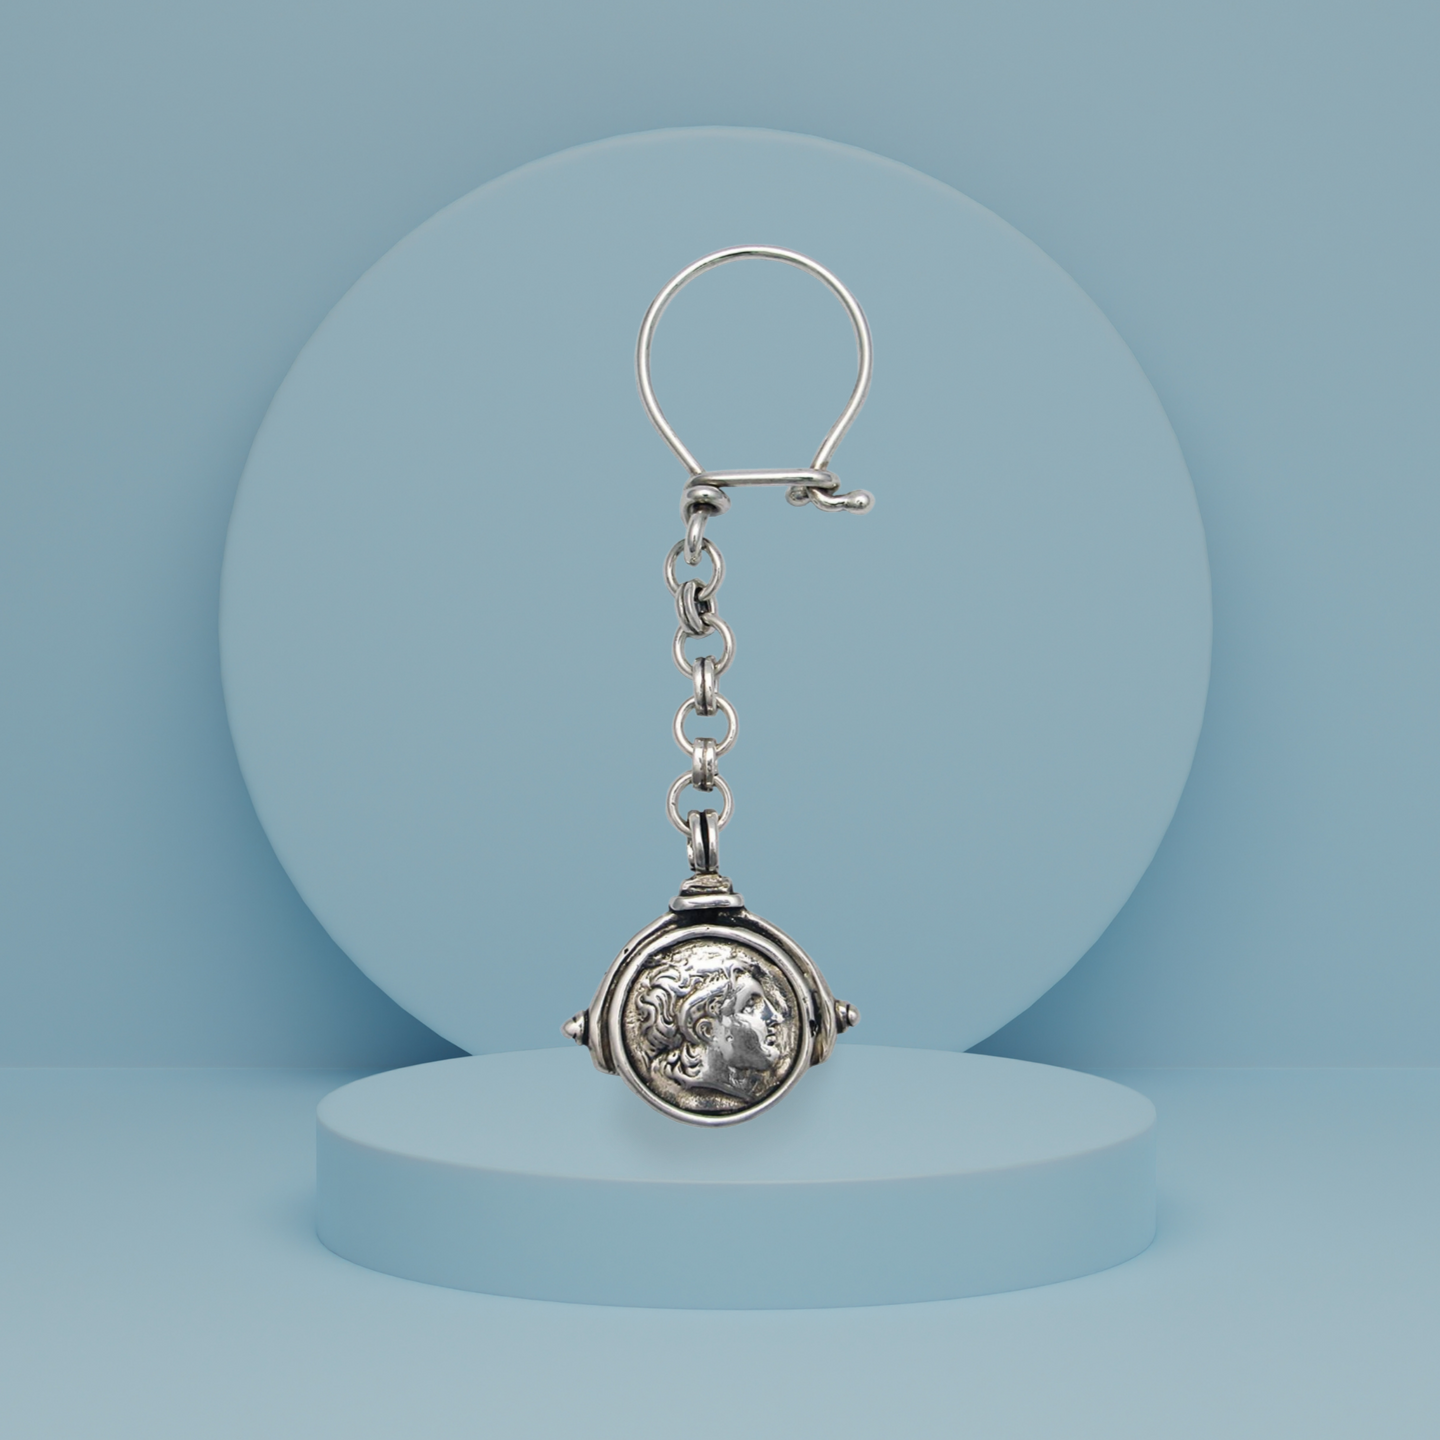 Alexander the Great Key ring in sterling silver (MP-04)